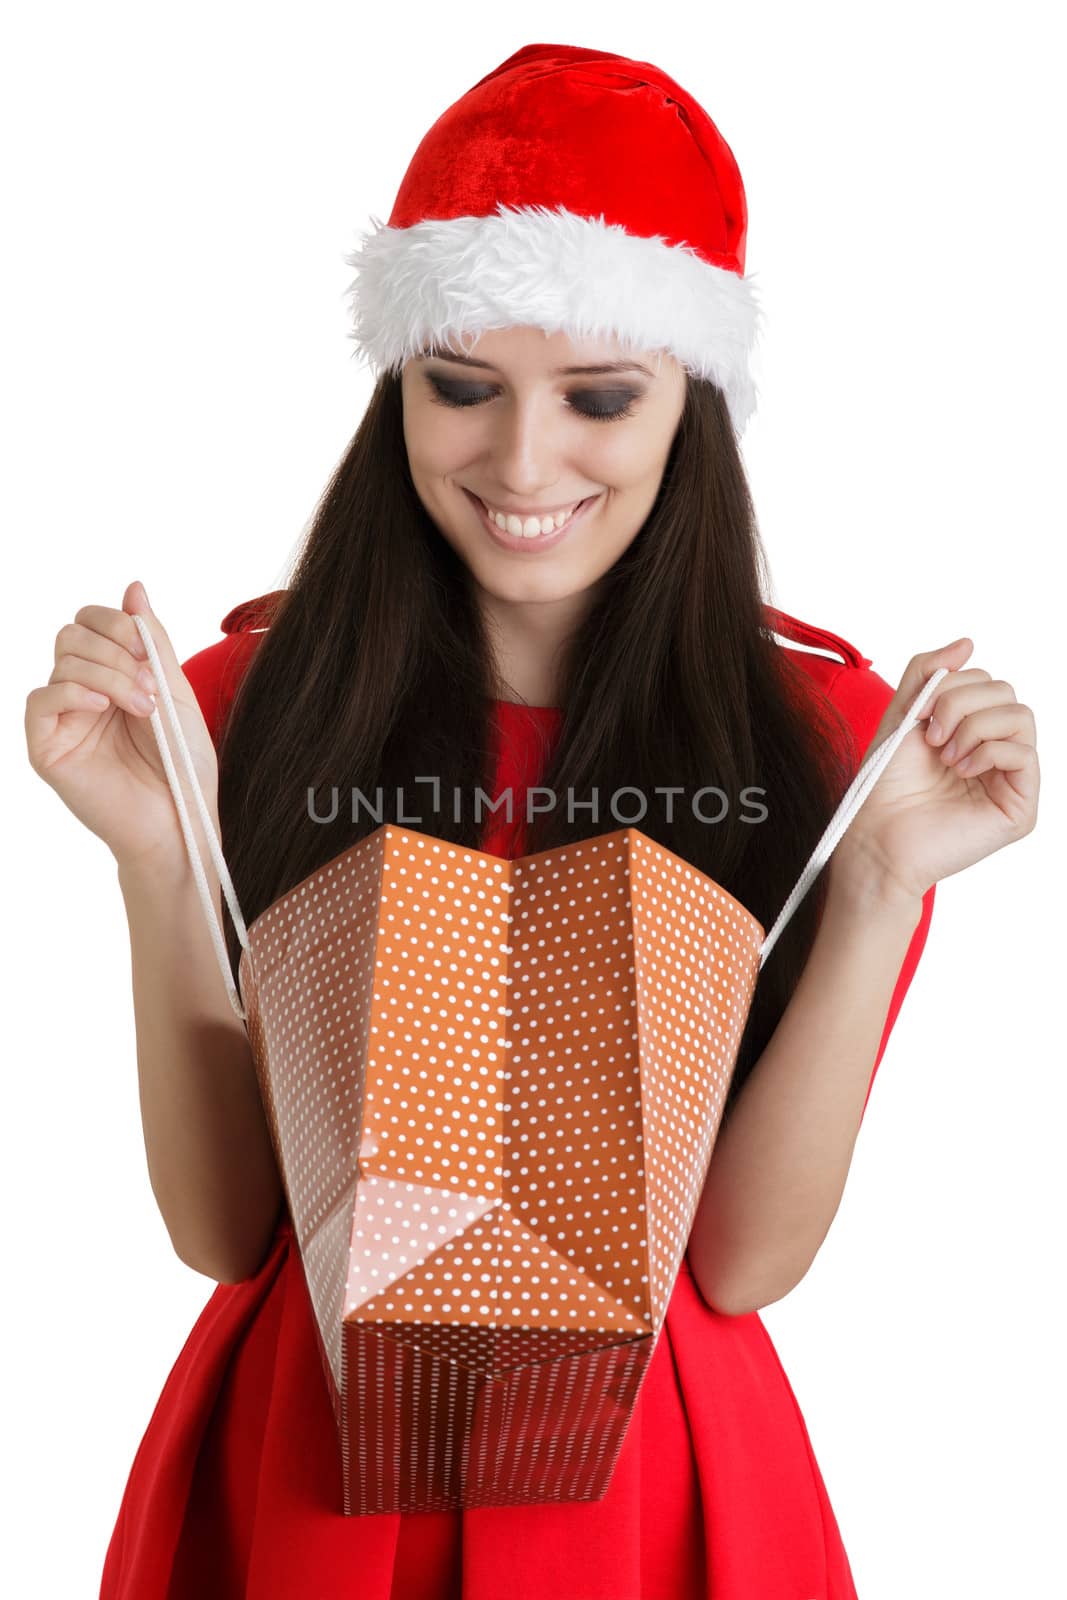 Christmas Girl Looking in Shopping Bag by NicoletaIonescu